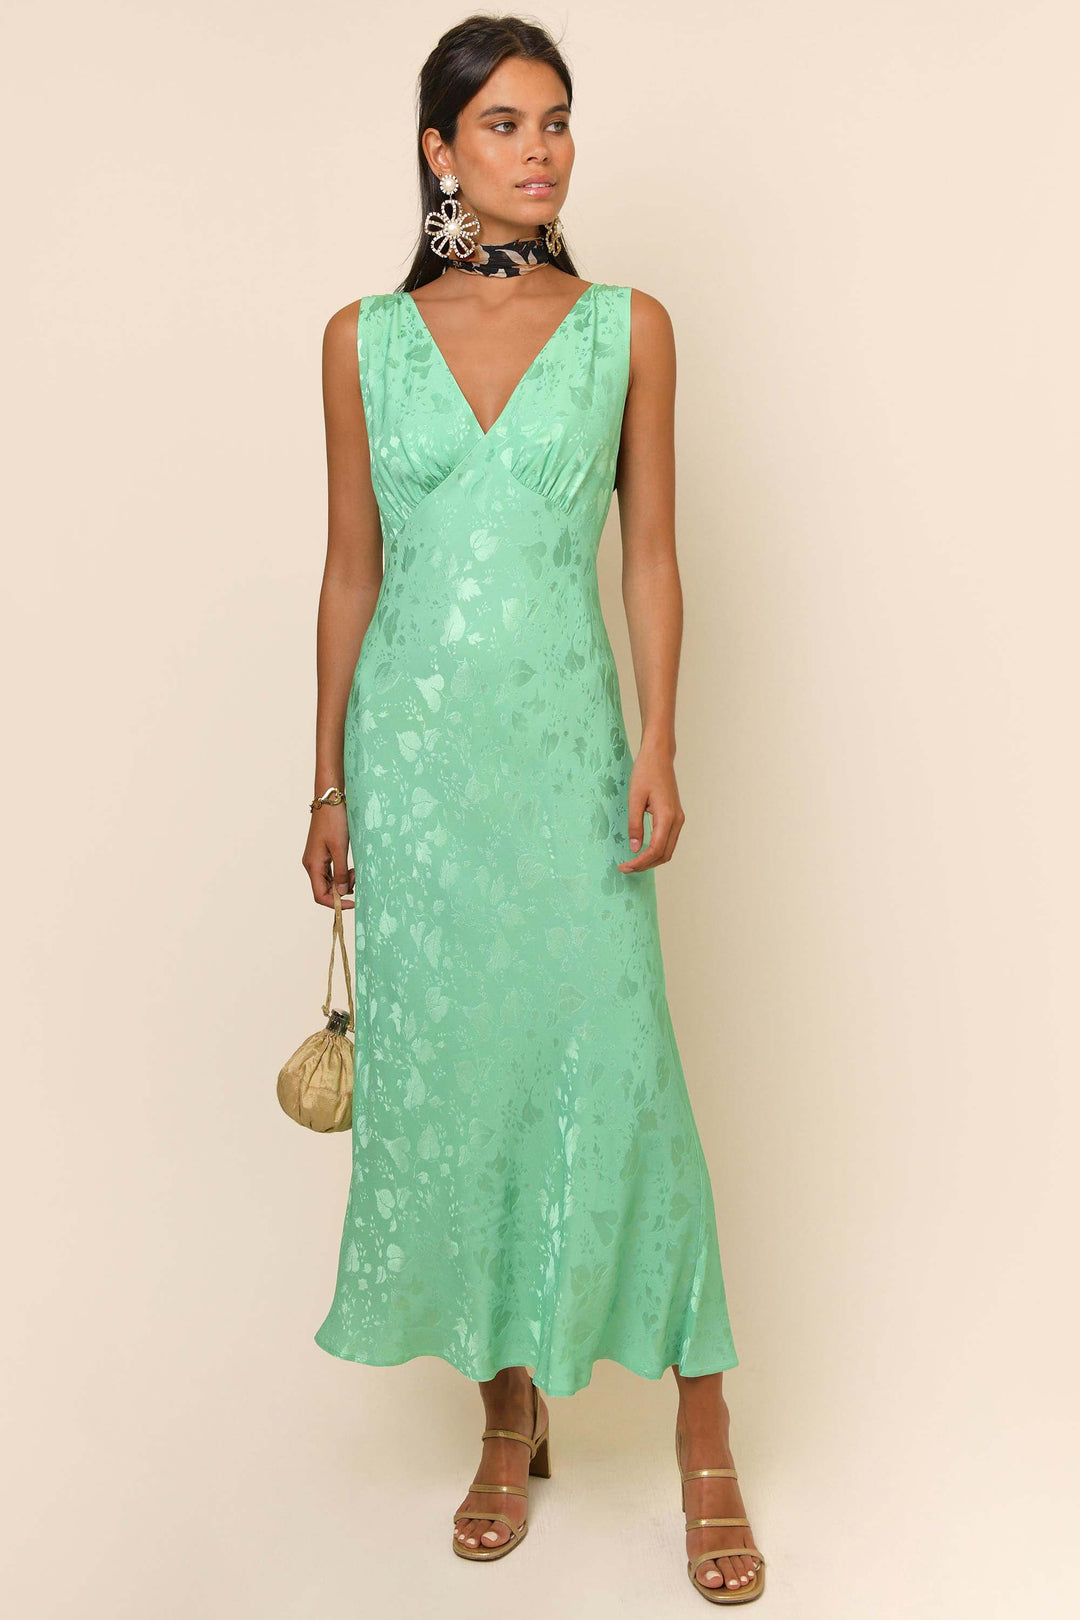 Rixo slinky and sophisticated midi dress in a beautiful aqua / jade green. It has a leaf-patterned weave, empire waistline and bias cut inspired by vintage finds and has timeless appeal. Deep V-neckline with a lined bust that Conceals a bra. Empire waisted with concealed side zipper and an unlined bias skirt. 